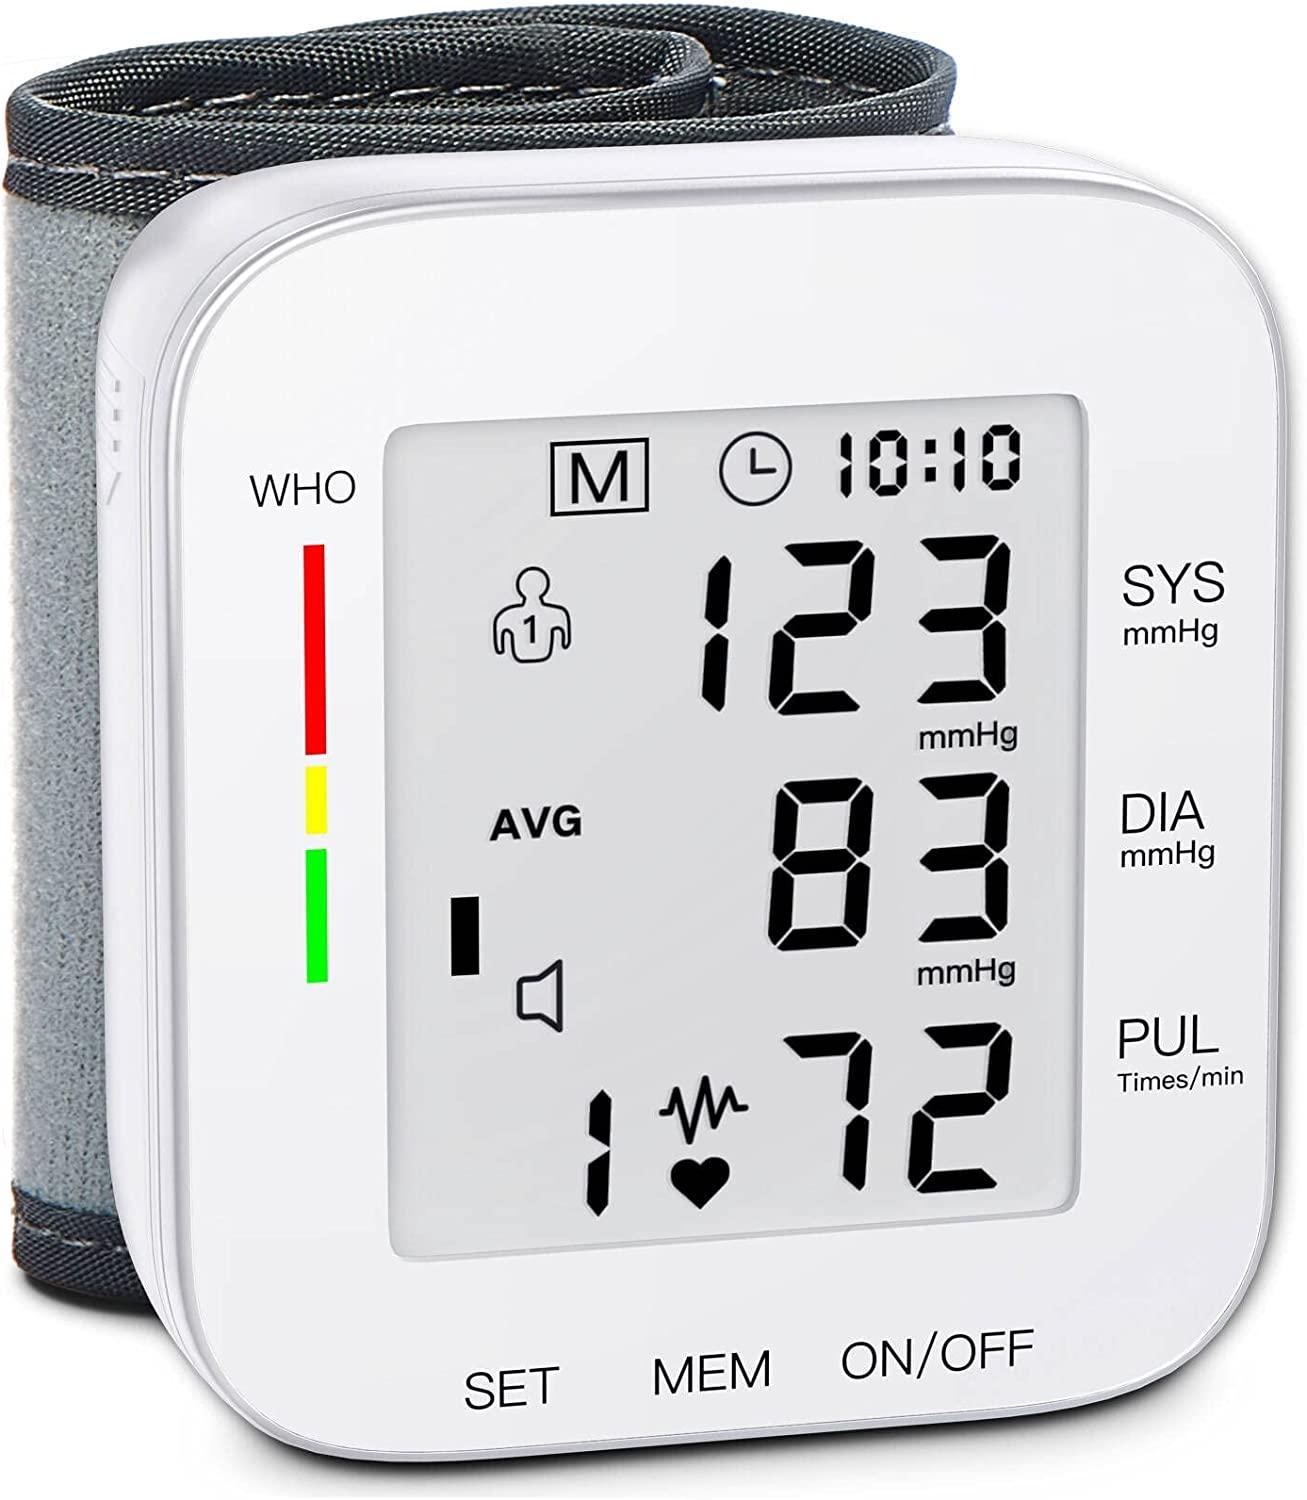 MMIZOO Voice Broadcast Multifunctional Blood Pressure Monitor